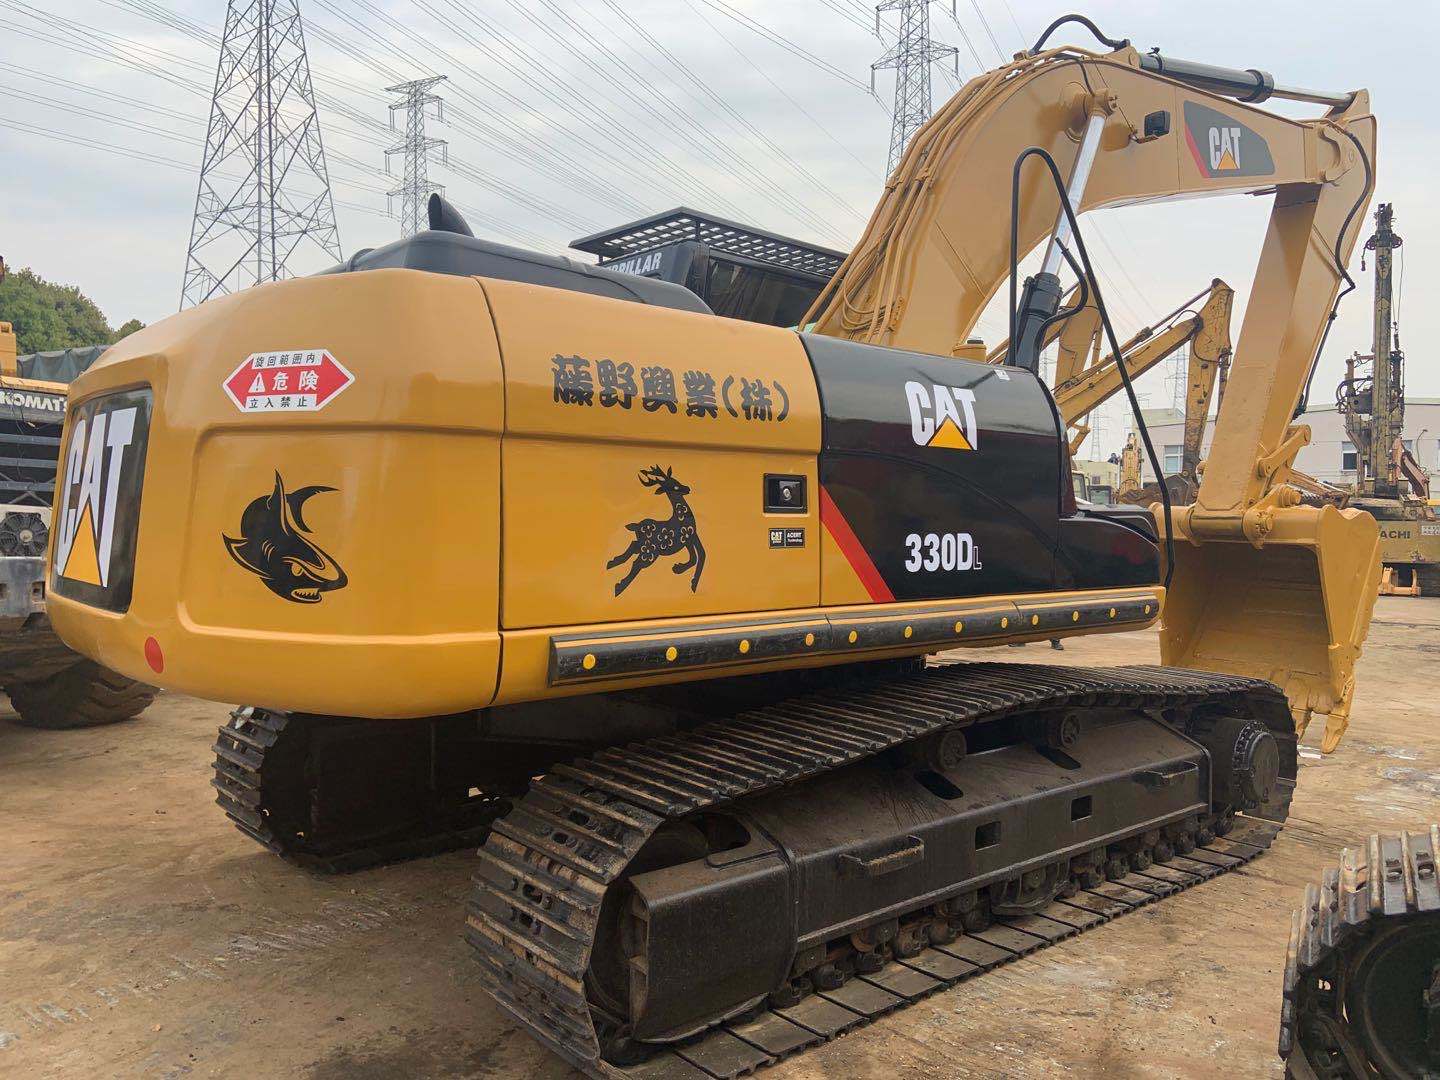 Used Caterpillar 336dl Excavator for Sale, Used Cat 336D /320dl /330dl Excavator for Sale Good Price